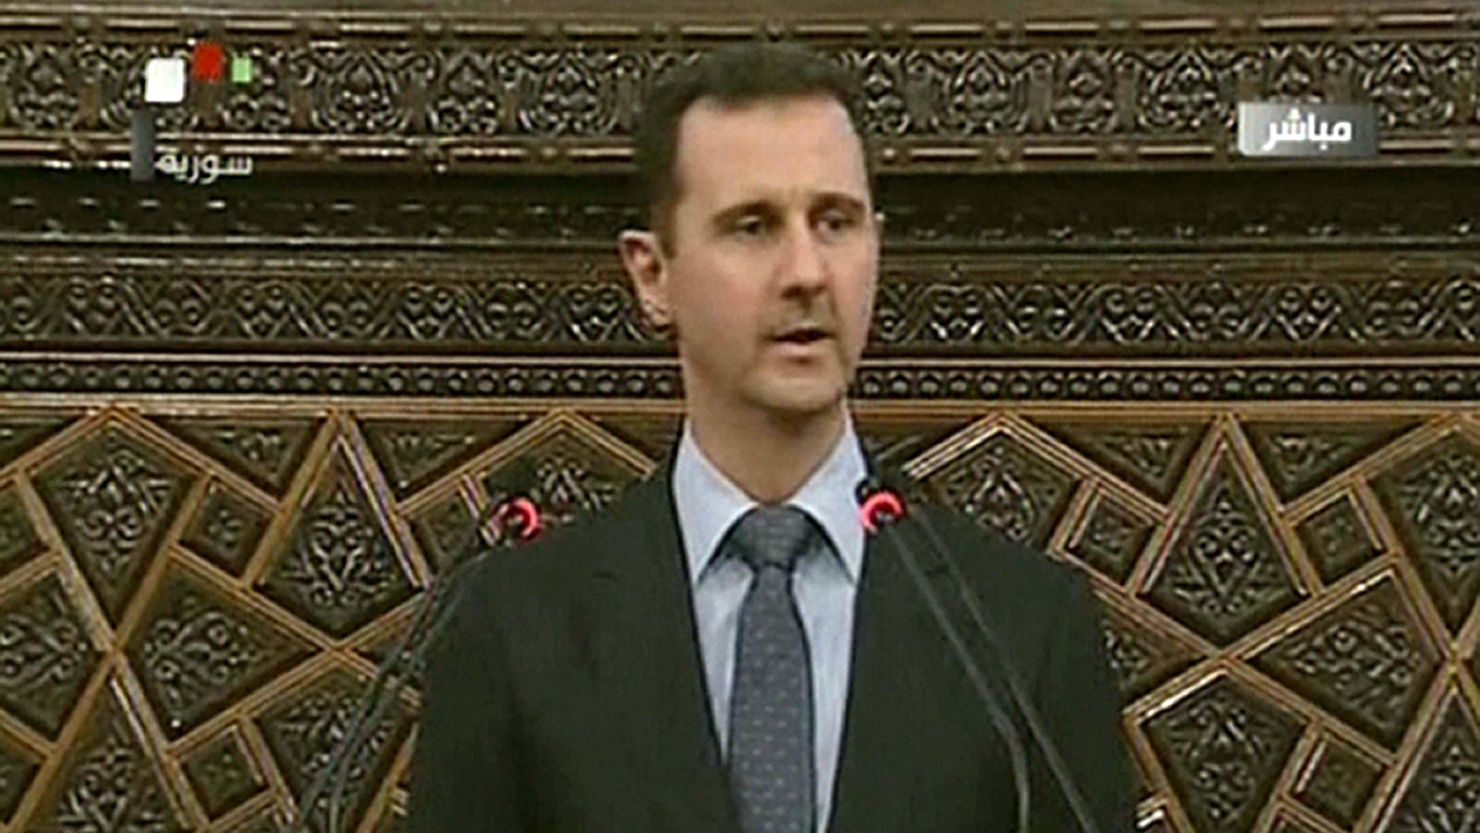 Syrian President Bashar al-Assad, pictured here on June 3, 2012, lambasted the Turkish Prime Minister for interfering in Syrian internal politics.